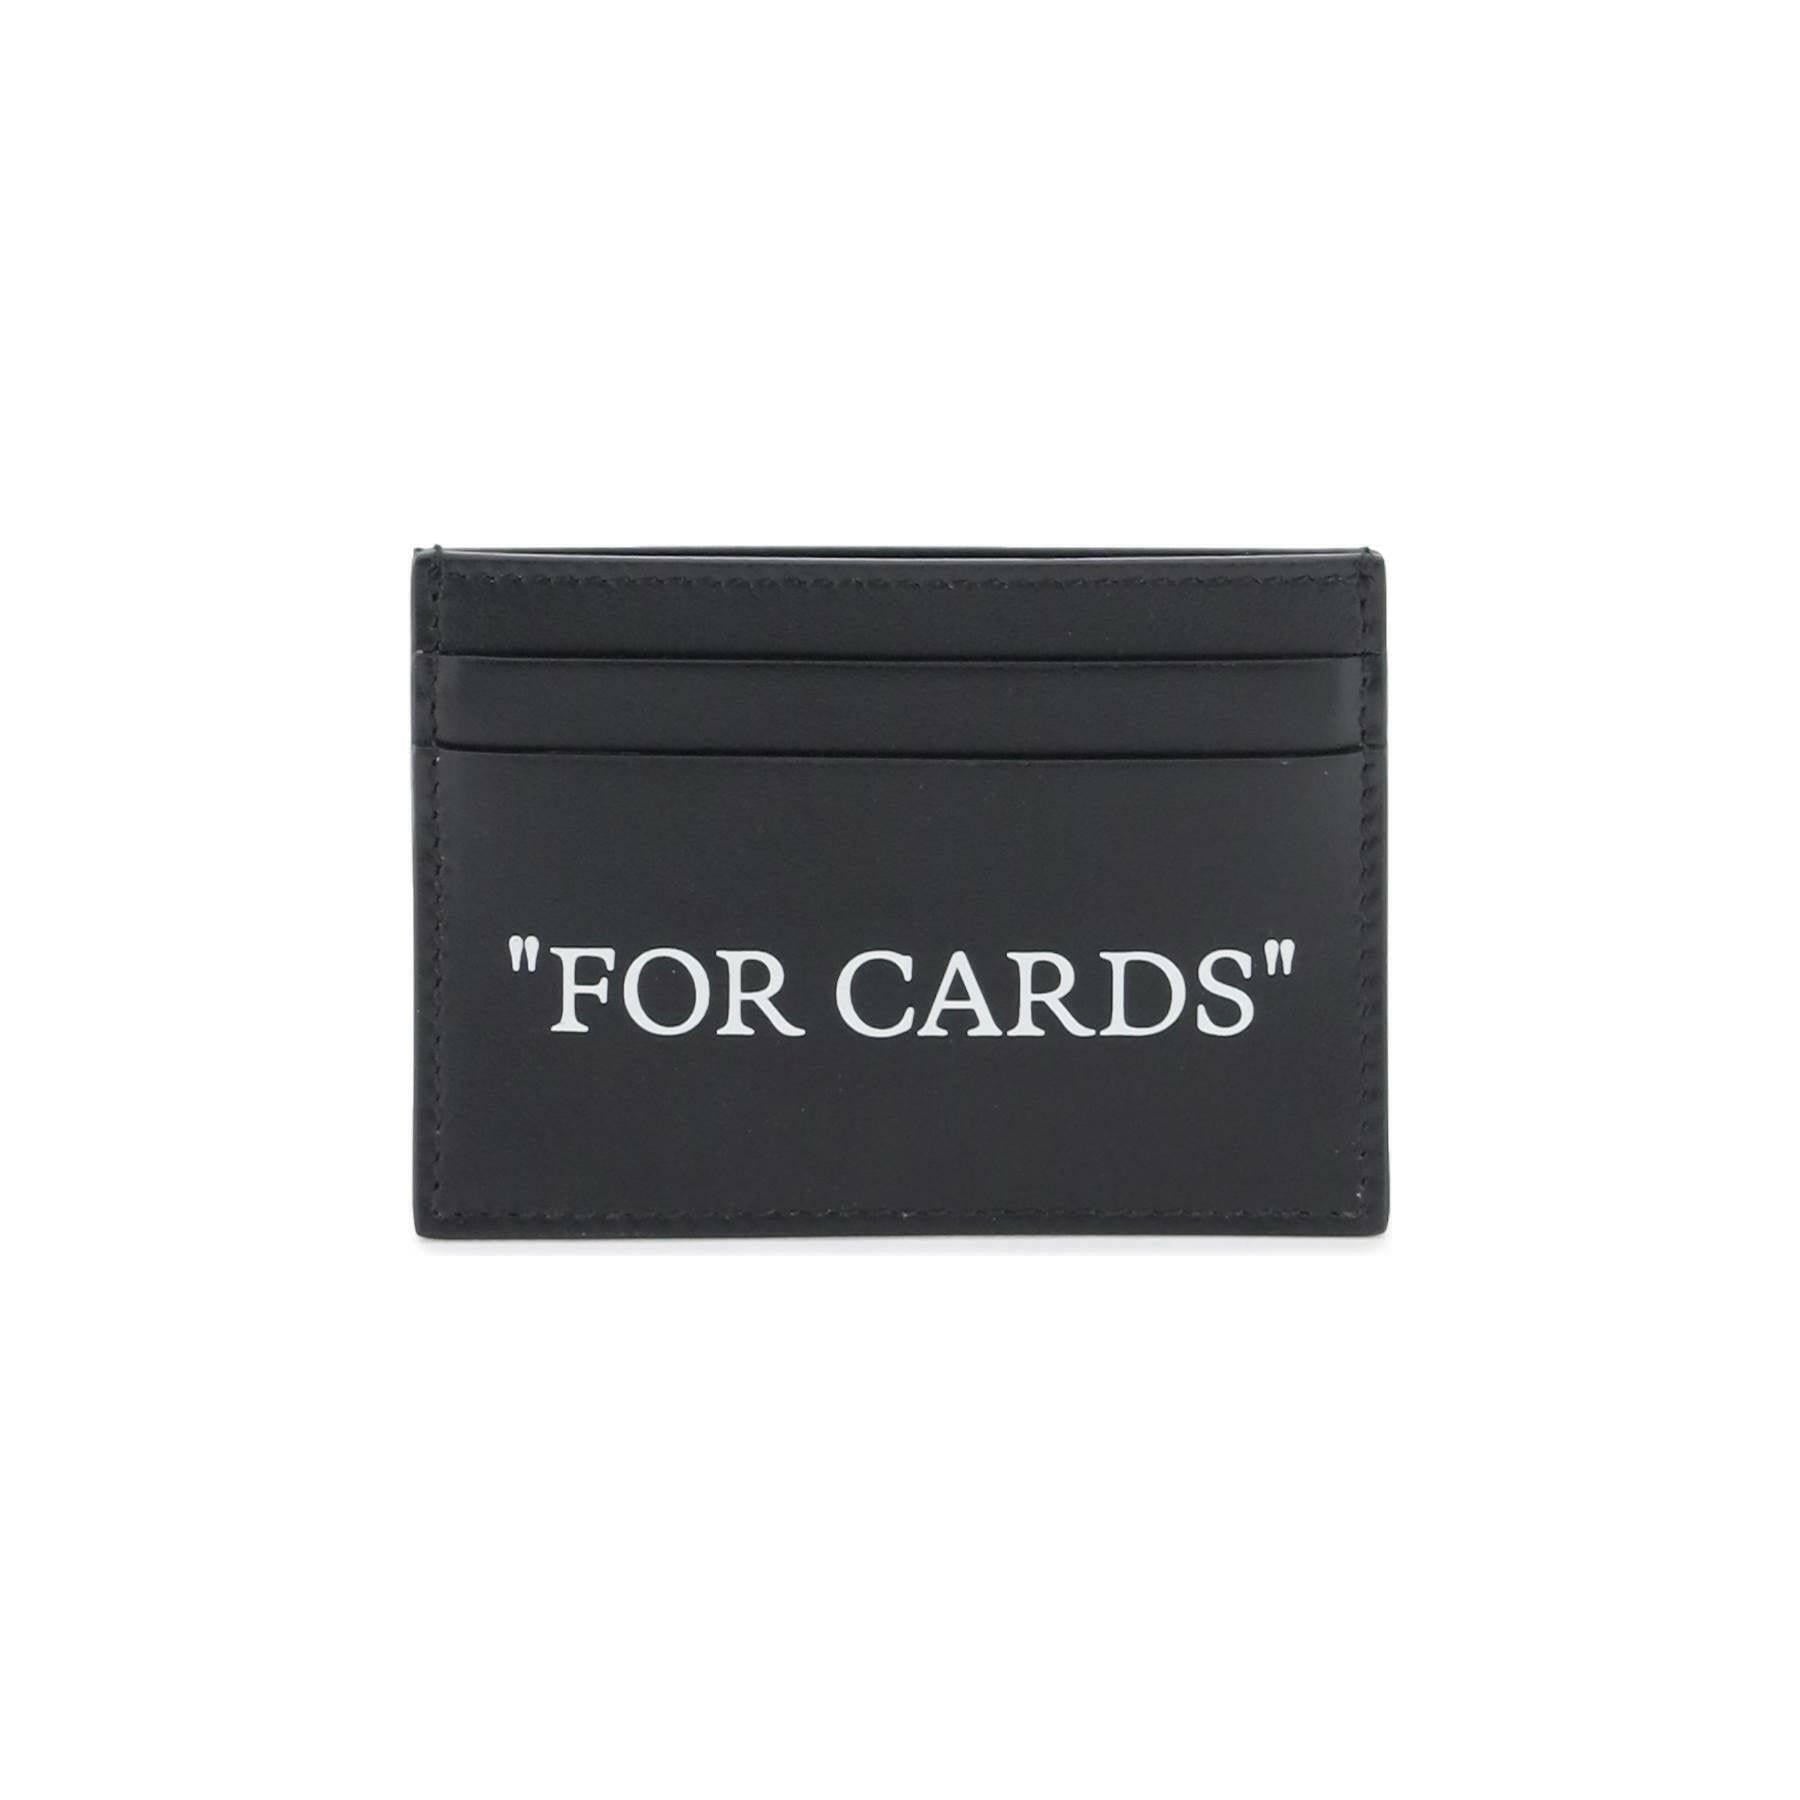 Bookish Card Holder With Lettering OFF-WHITE JOHN JULIA.